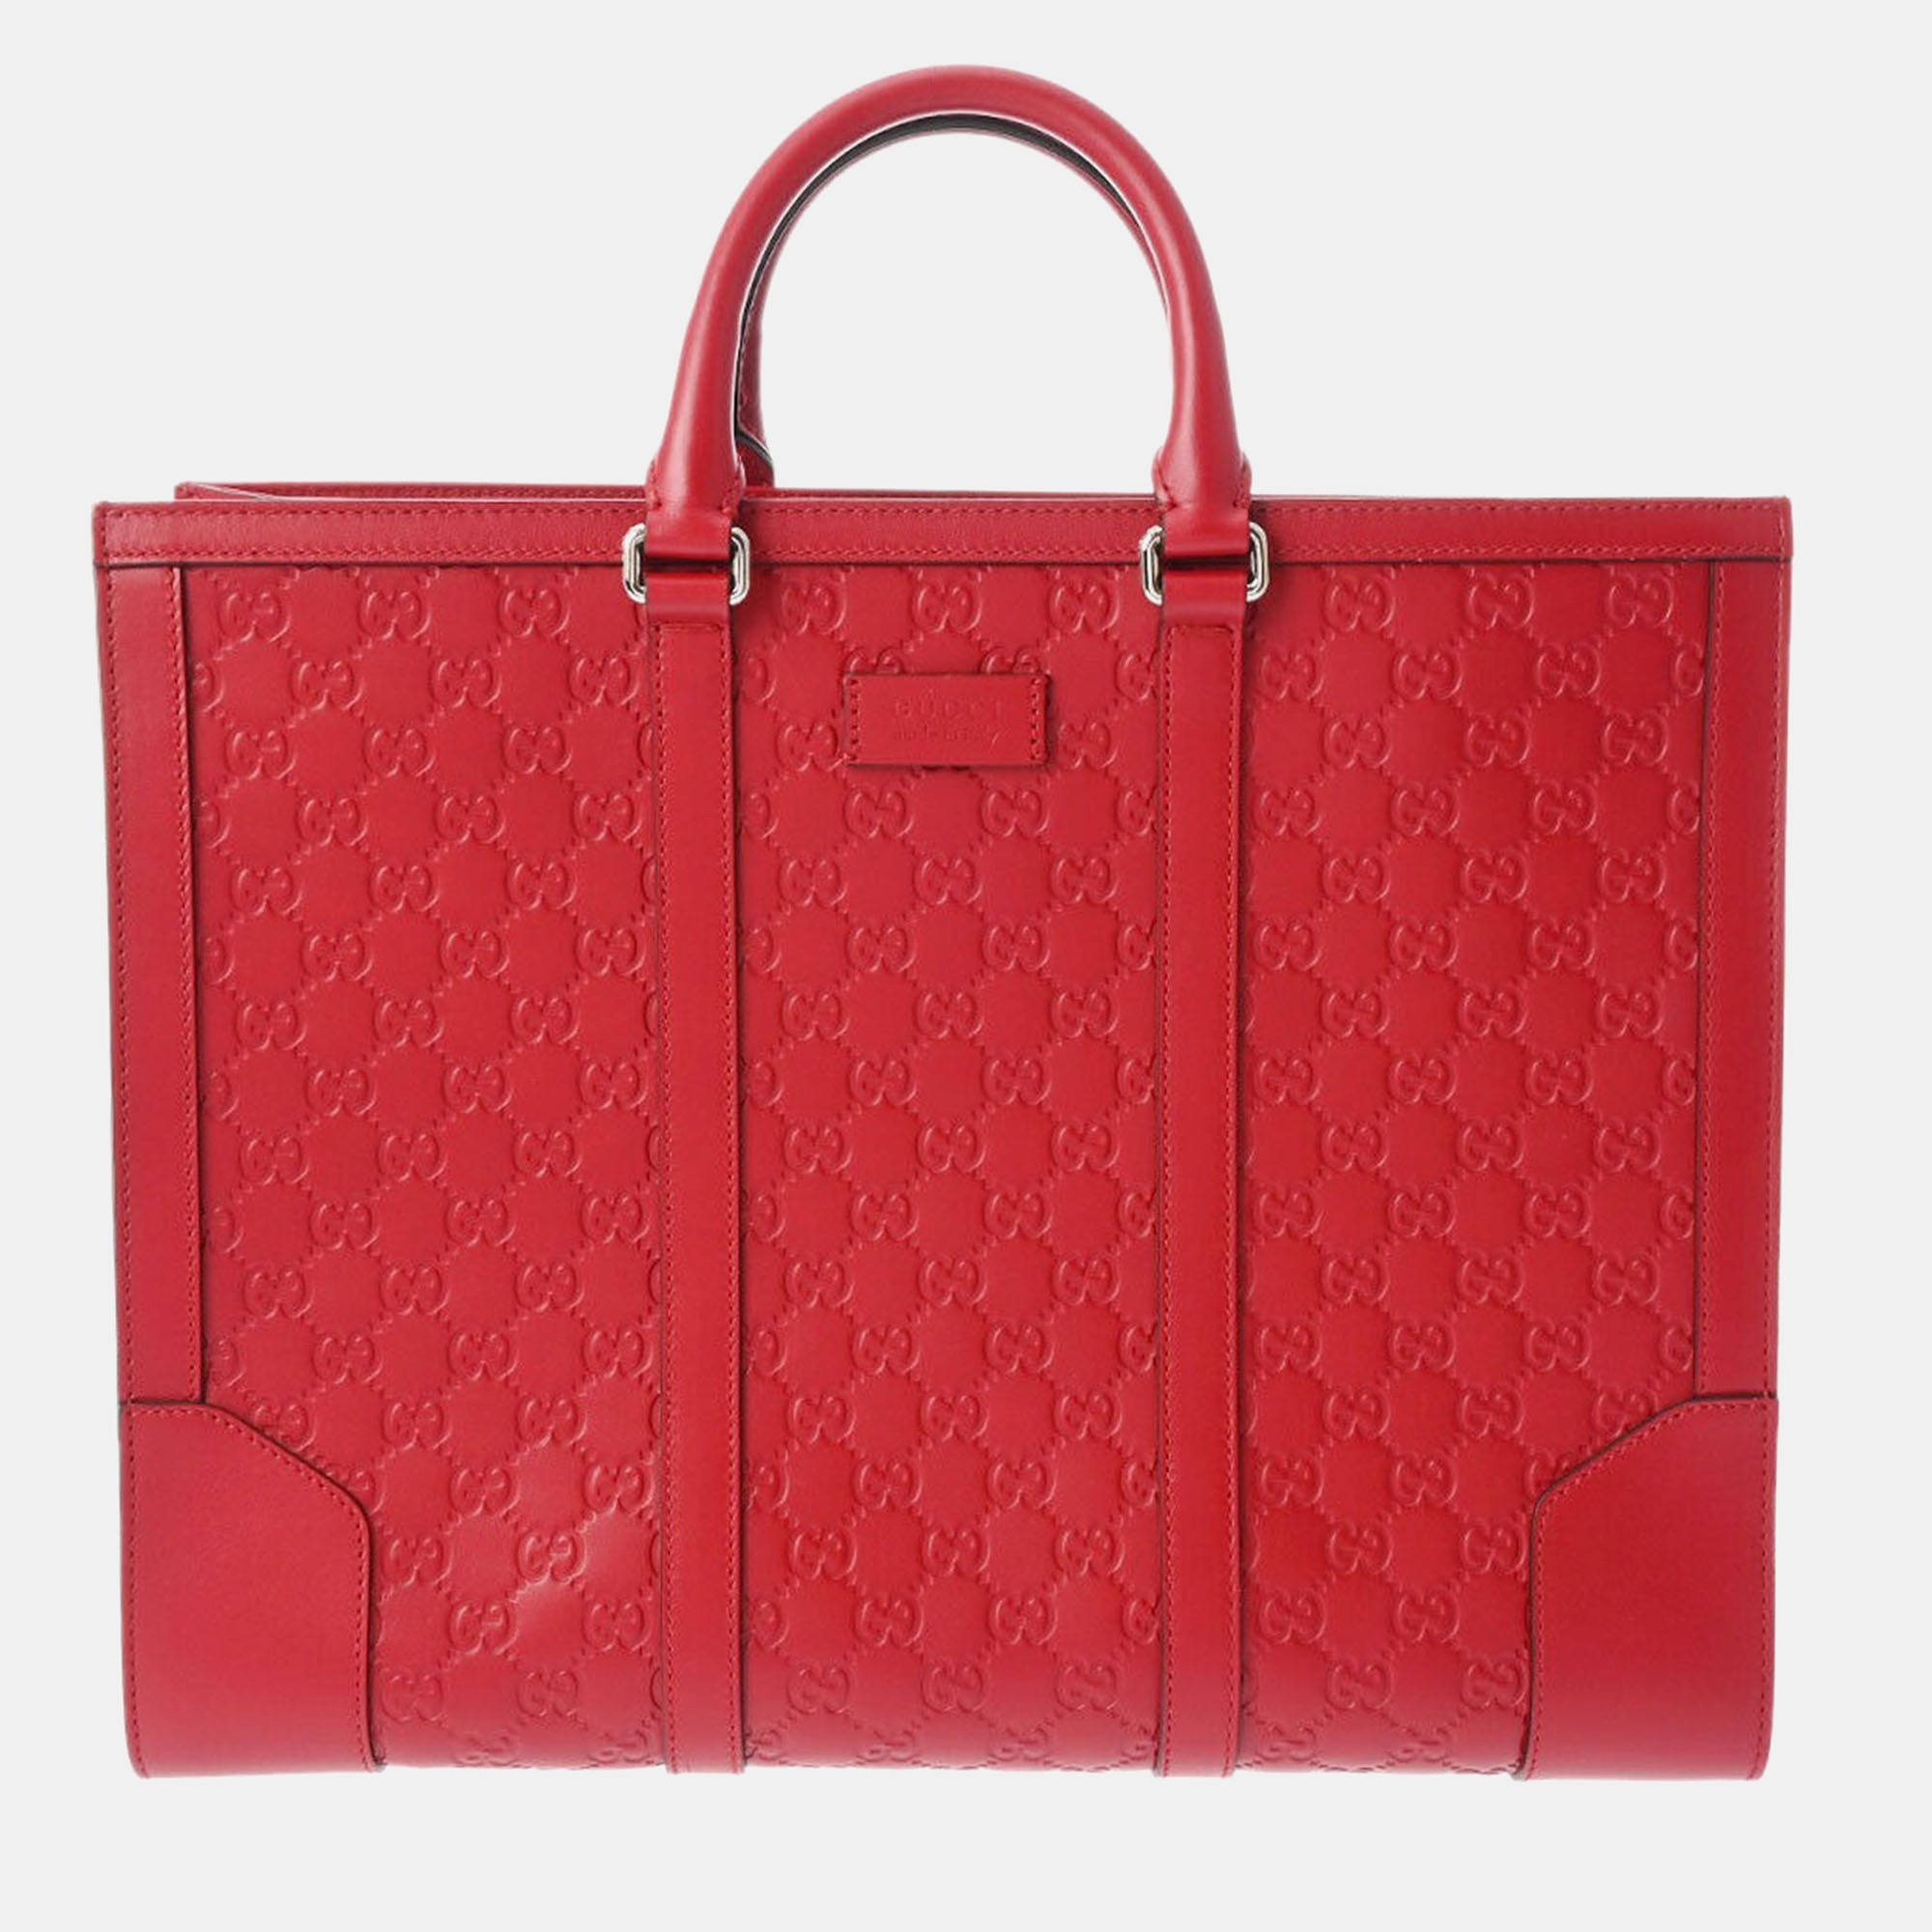 

Gucci Red Guccissima Leather Large Signature Convertible Top Handle Tote Bag